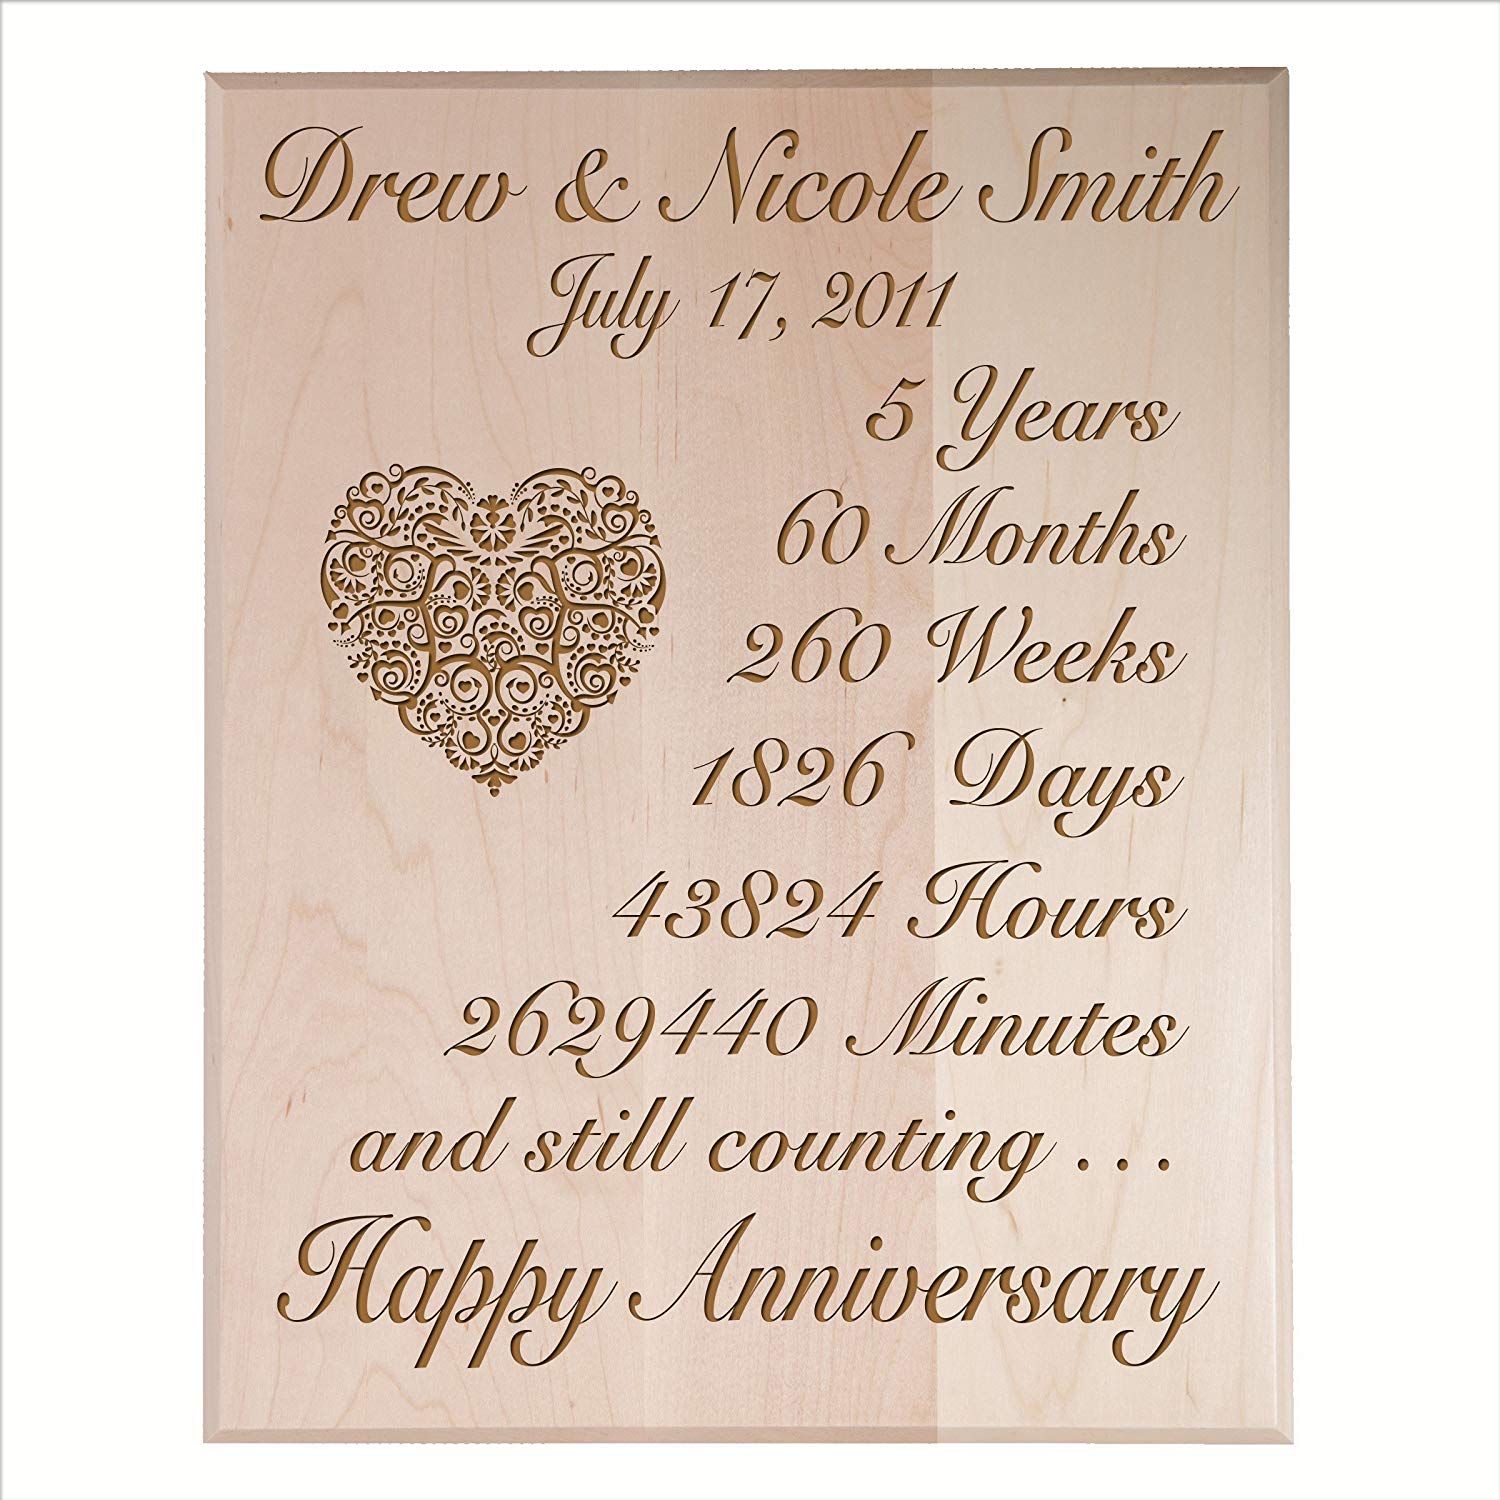 Personalized 5th Anniversary Wall Plaque - Still Counting - LifeSong Milestones